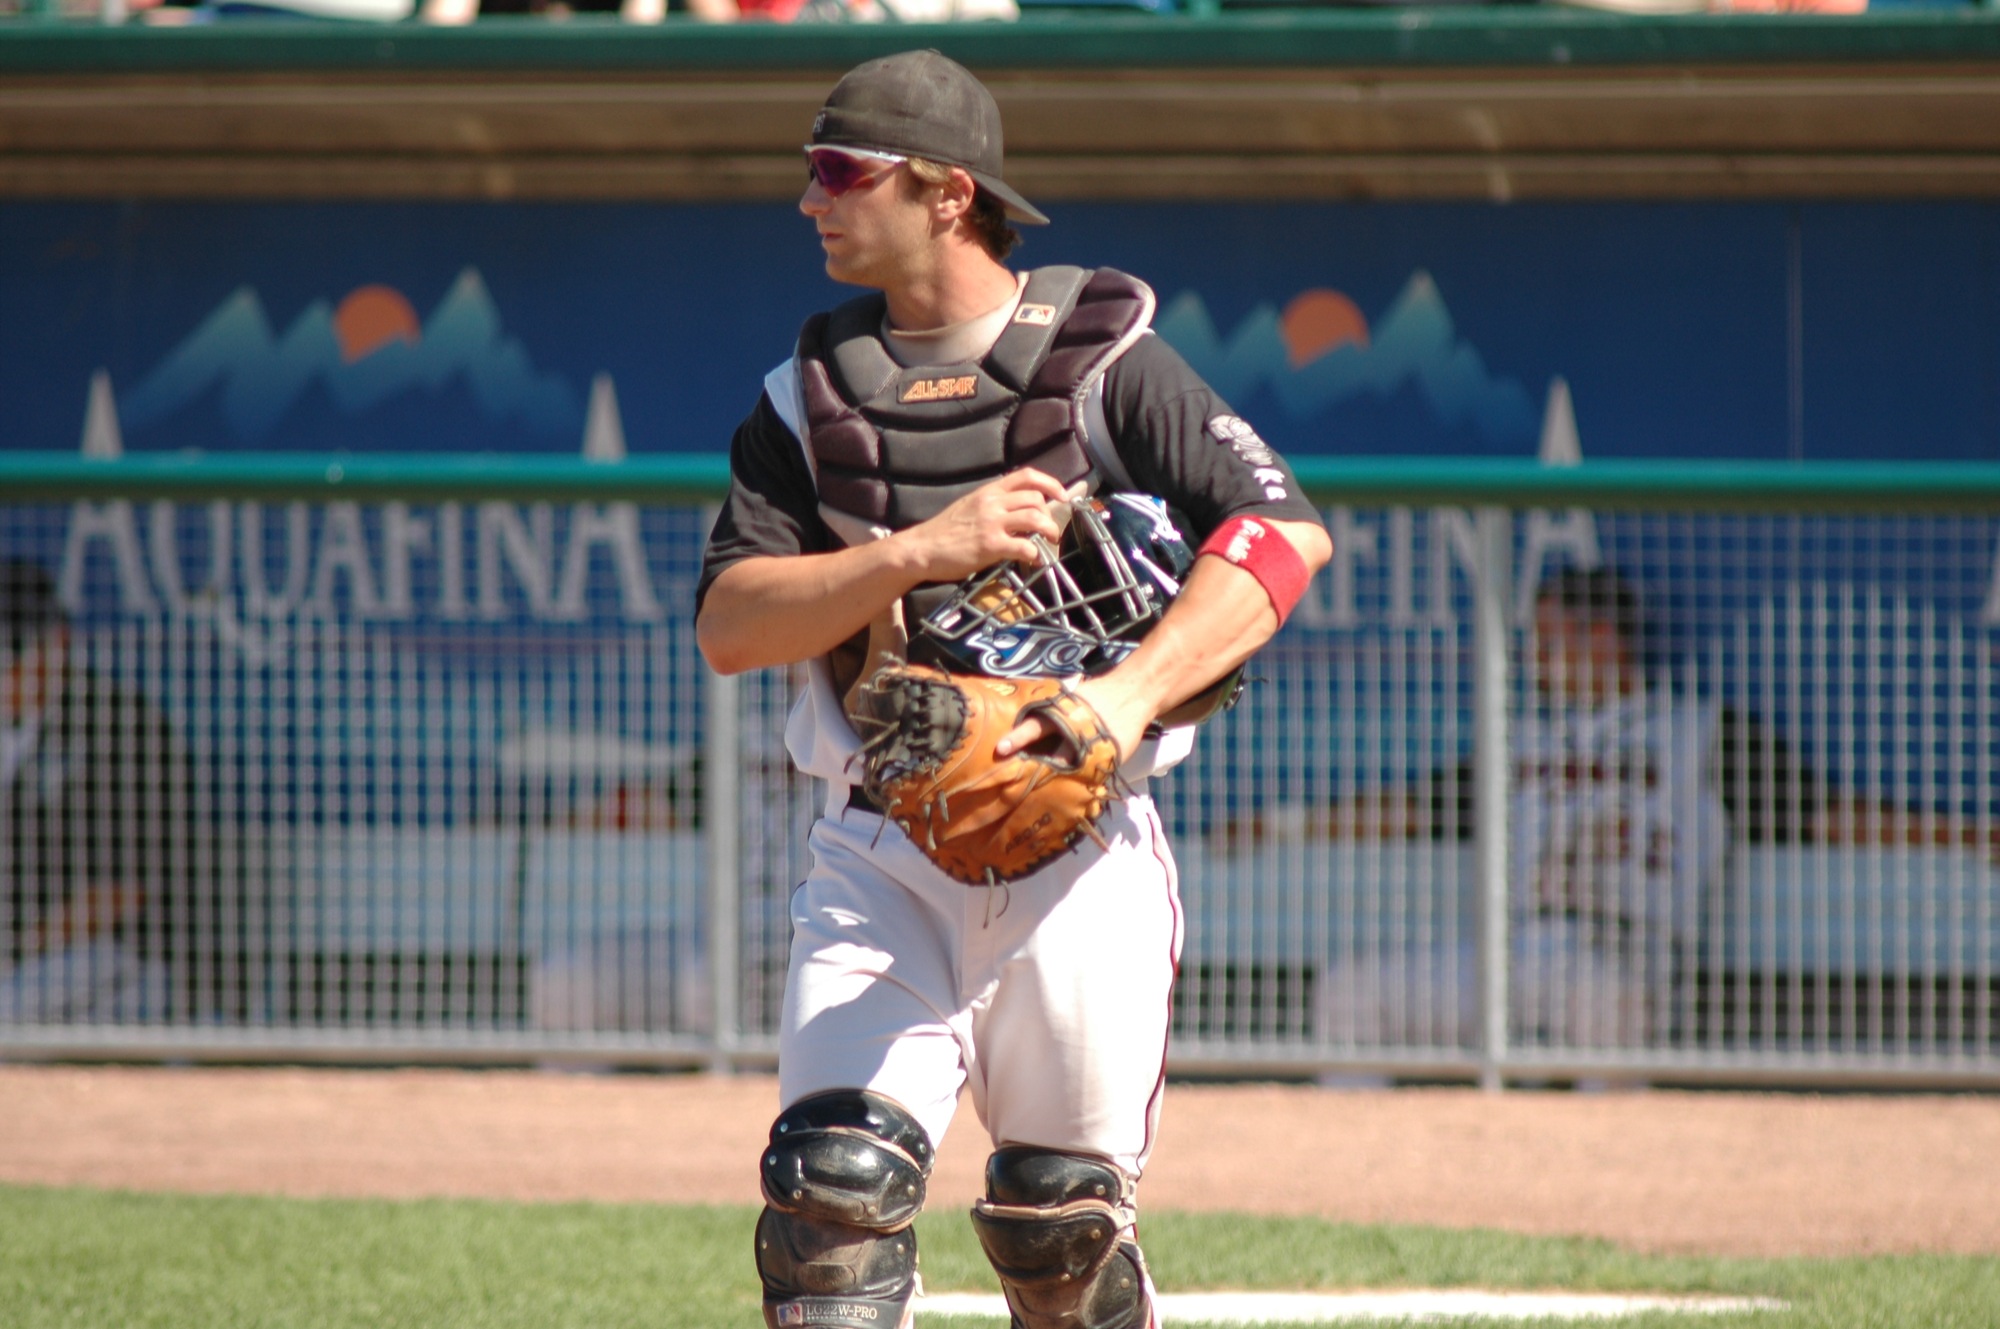 a baseball player holding his catchers mitt on the field